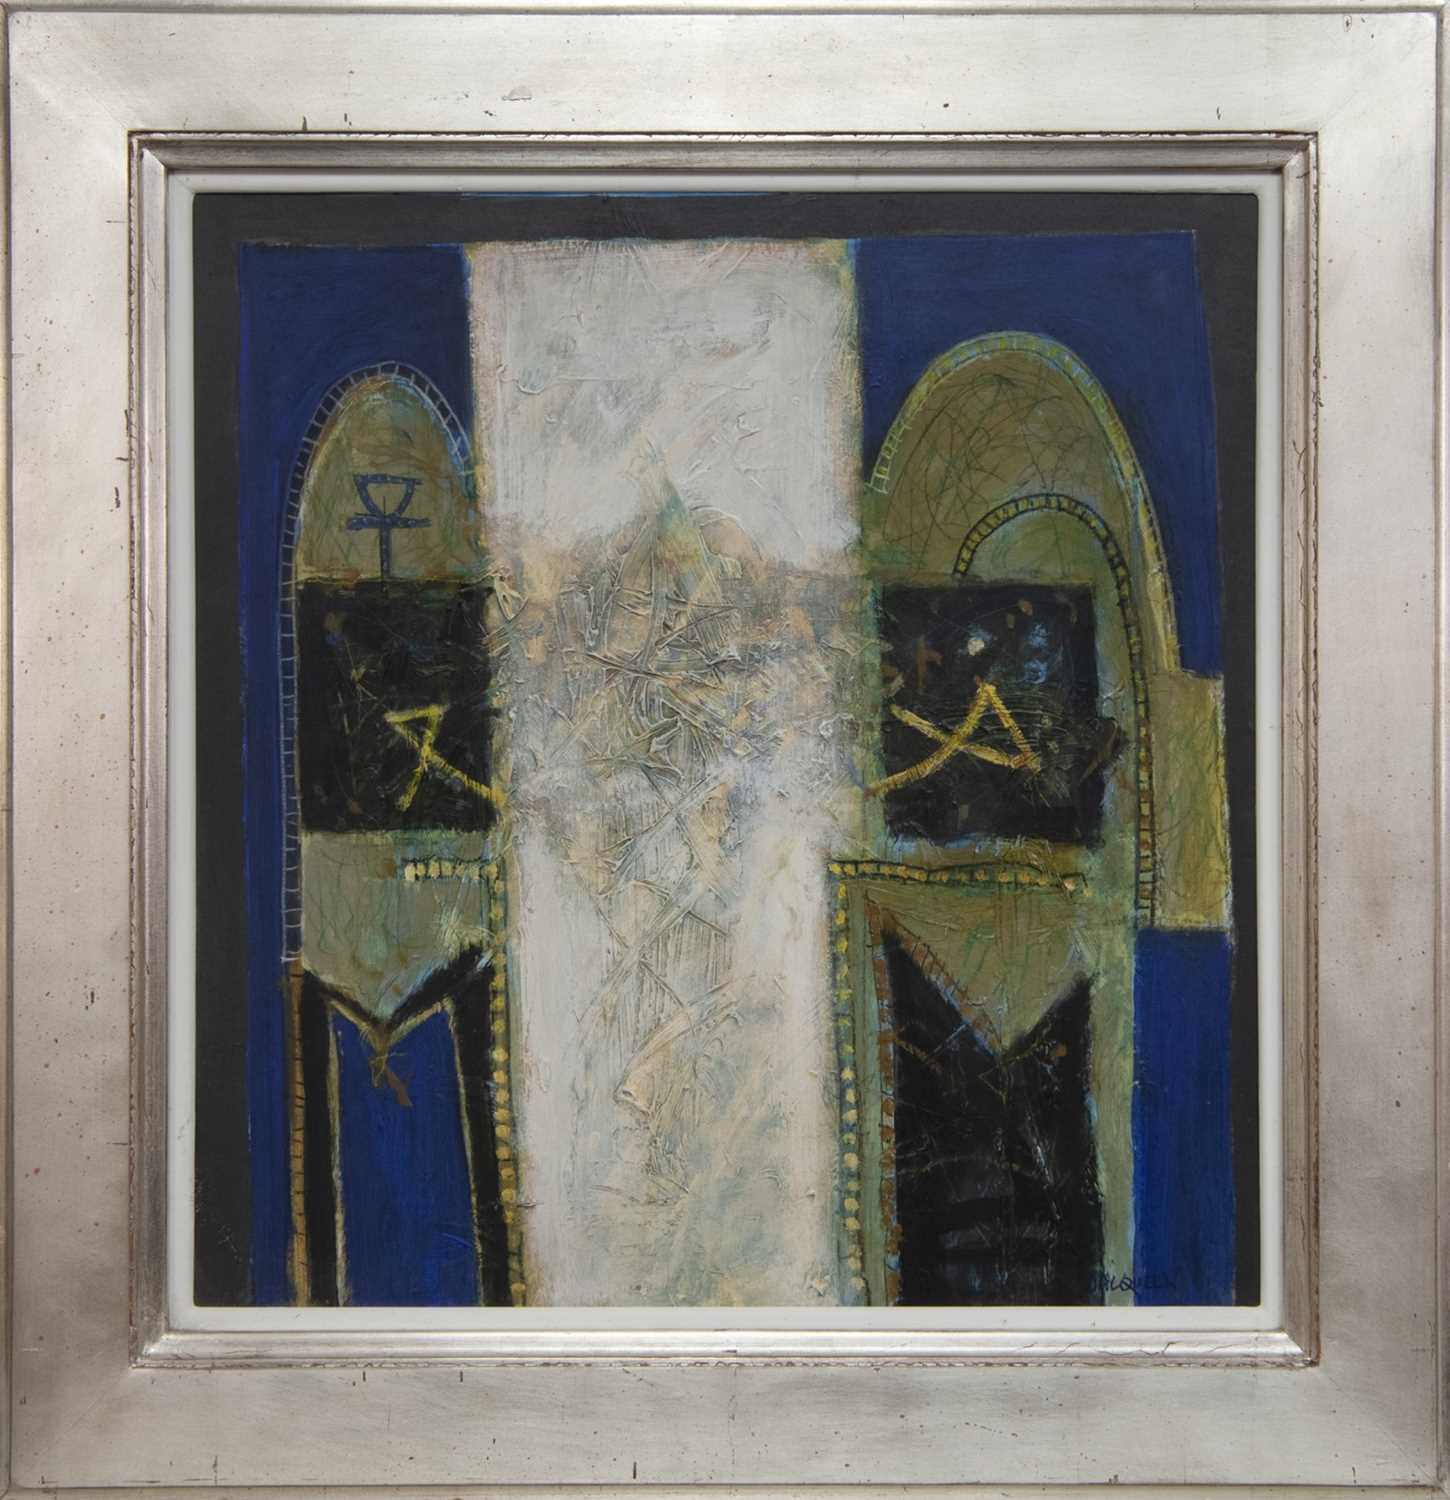 Lot 603 - EGYPTIAN DOORS, A MIXED MEDIA BY CHARLES MACQUEEN